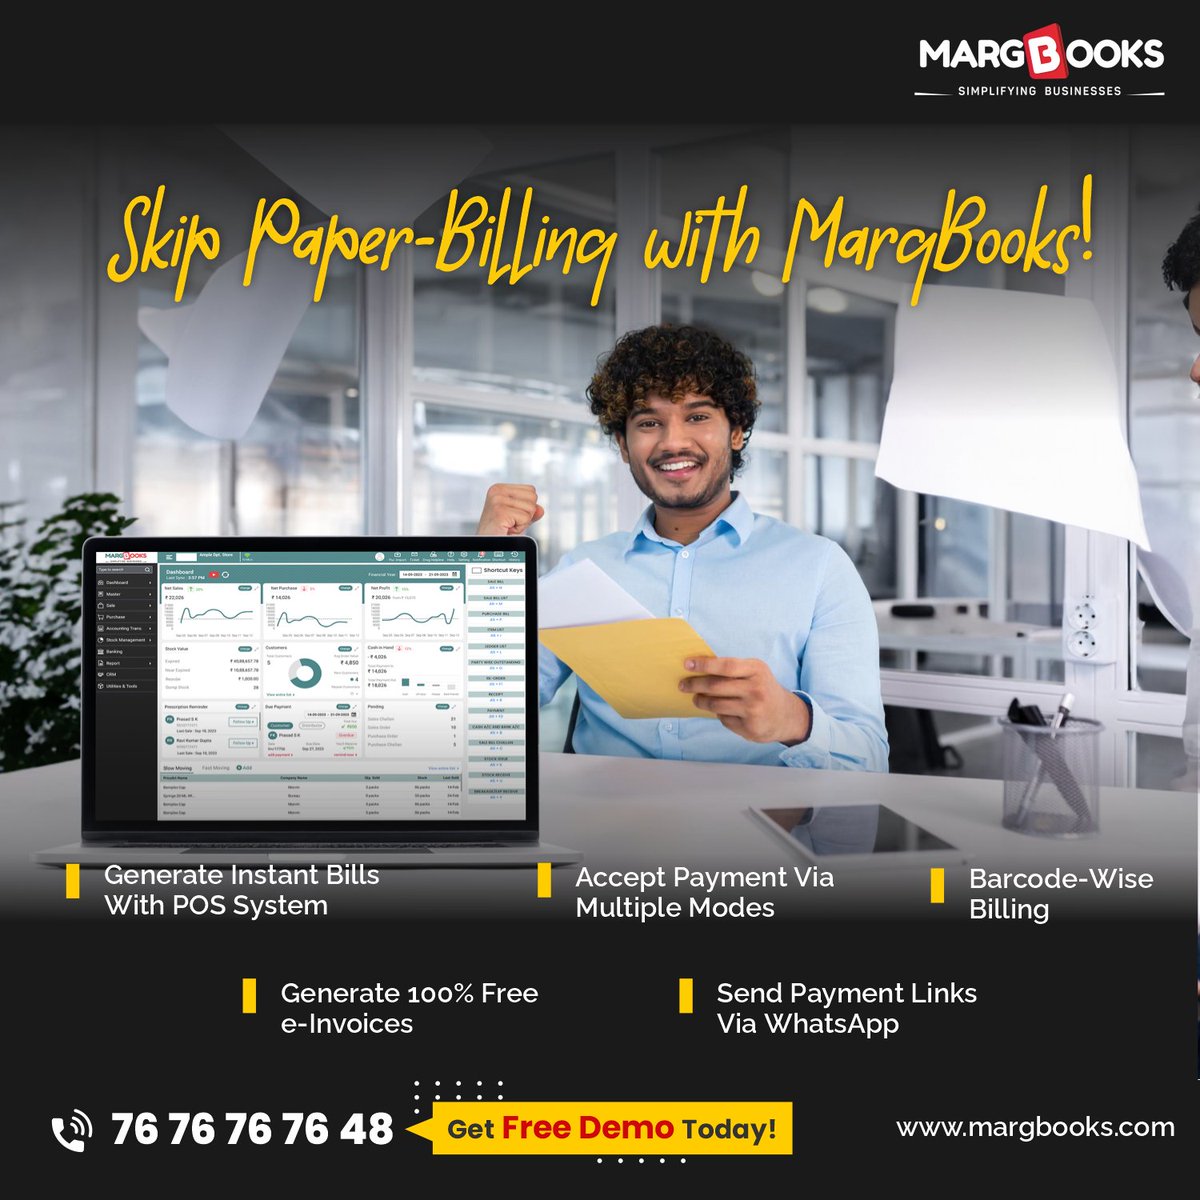 Strategize Billing Process /w MargBooks True-Cloud Based Billing & Accounting Software!

𝐁𝐨𝐨𝐤 𝐃𝐞𝐦𝐨 @𝟕𝟔𝟕𝟔𝟕𝟔𝟕𝟔𝟒𝟖 𝐨𝐫 𝐯𝐢𝐬𝐢𝐭 𝐰𝐰𝐰.𝐦𝐚𝐫𝐠𝐛𝐨𝐨𝐤𝐬.𝐜𝐨𝐦

#cloudaccounting #eInvoicing #GSTfiling #datasecurity #BusinessSoftware #easybilling #margbooks